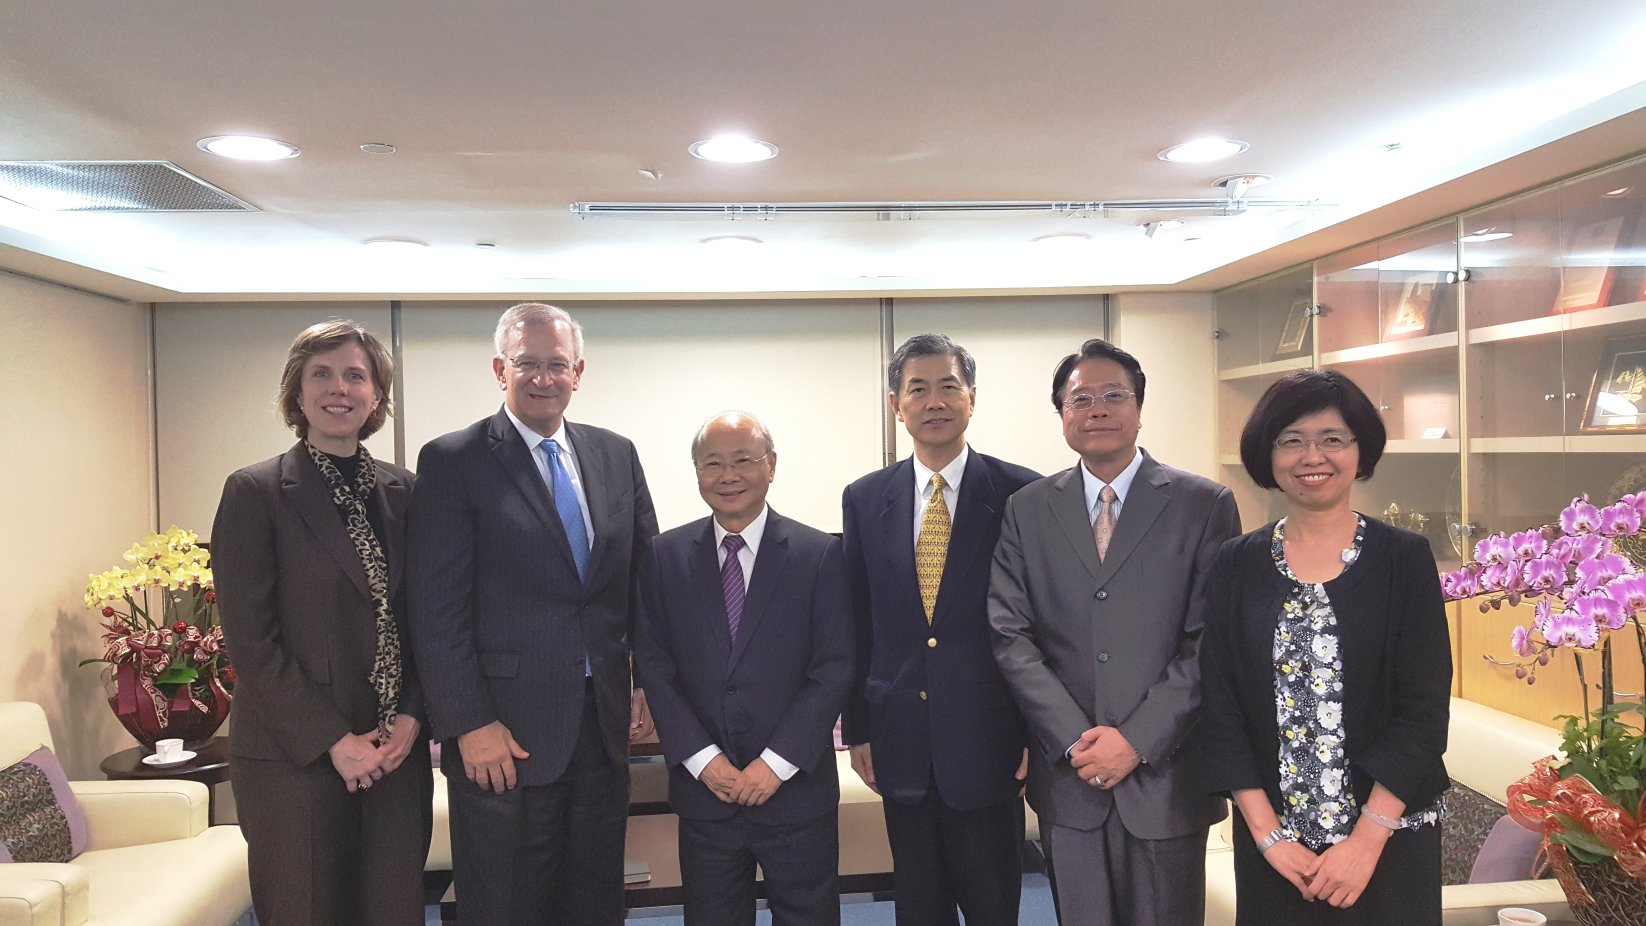 Group photo of CDIC Chairman Dr． Paul C．D． Lei （2nd from the right） together with Chair of Executive Council of IADI and Vice Chairman of FDIC Thomas M． Hoenig （2nd from the left），